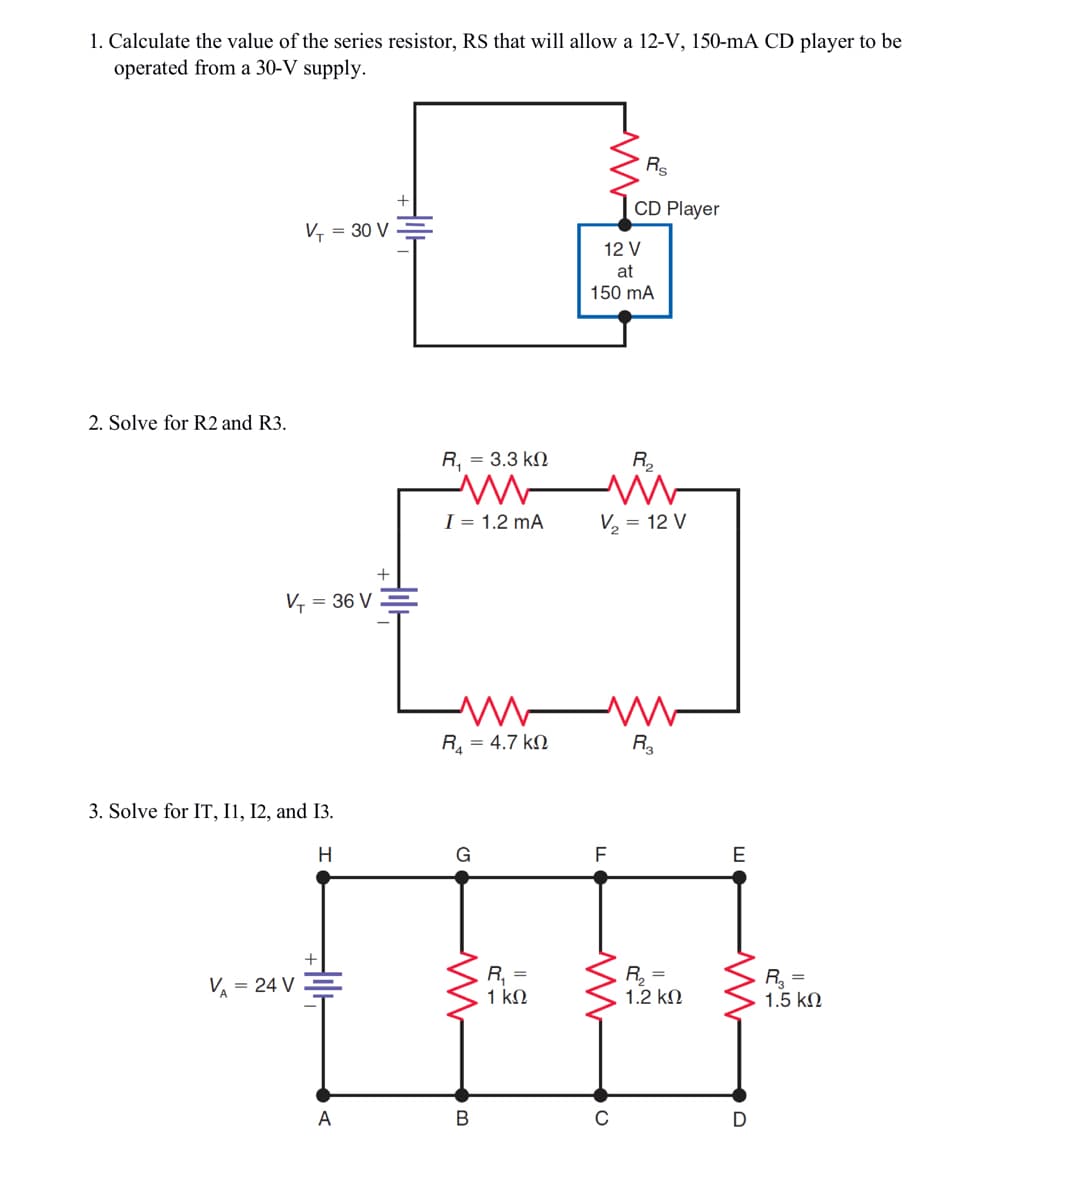 1. Calculate the value of the series resistor, RS that will allow a 12-V, 150-mA CD player to be
operated from a 30-V supply.
2. Solve for R2 and R3.
V₁ = 30 V
V₁ = 36 V
3. Solve for IT, 11, 12, and 13.
H
V = 24 V
A
R, = 3.3 kΩ
I = 1.2 mA
M
R = 4.7 ΚΩ
G
M
B
R₁ =
1 ΚΩ
12 V
at
150 mA
F
Rs
CD Player
V₂ = 12 V
R₂
с
<!
R₂
R₂ =
1.2 ΚΩ
E
M
D
R₂ =
1.5 ΚΩ